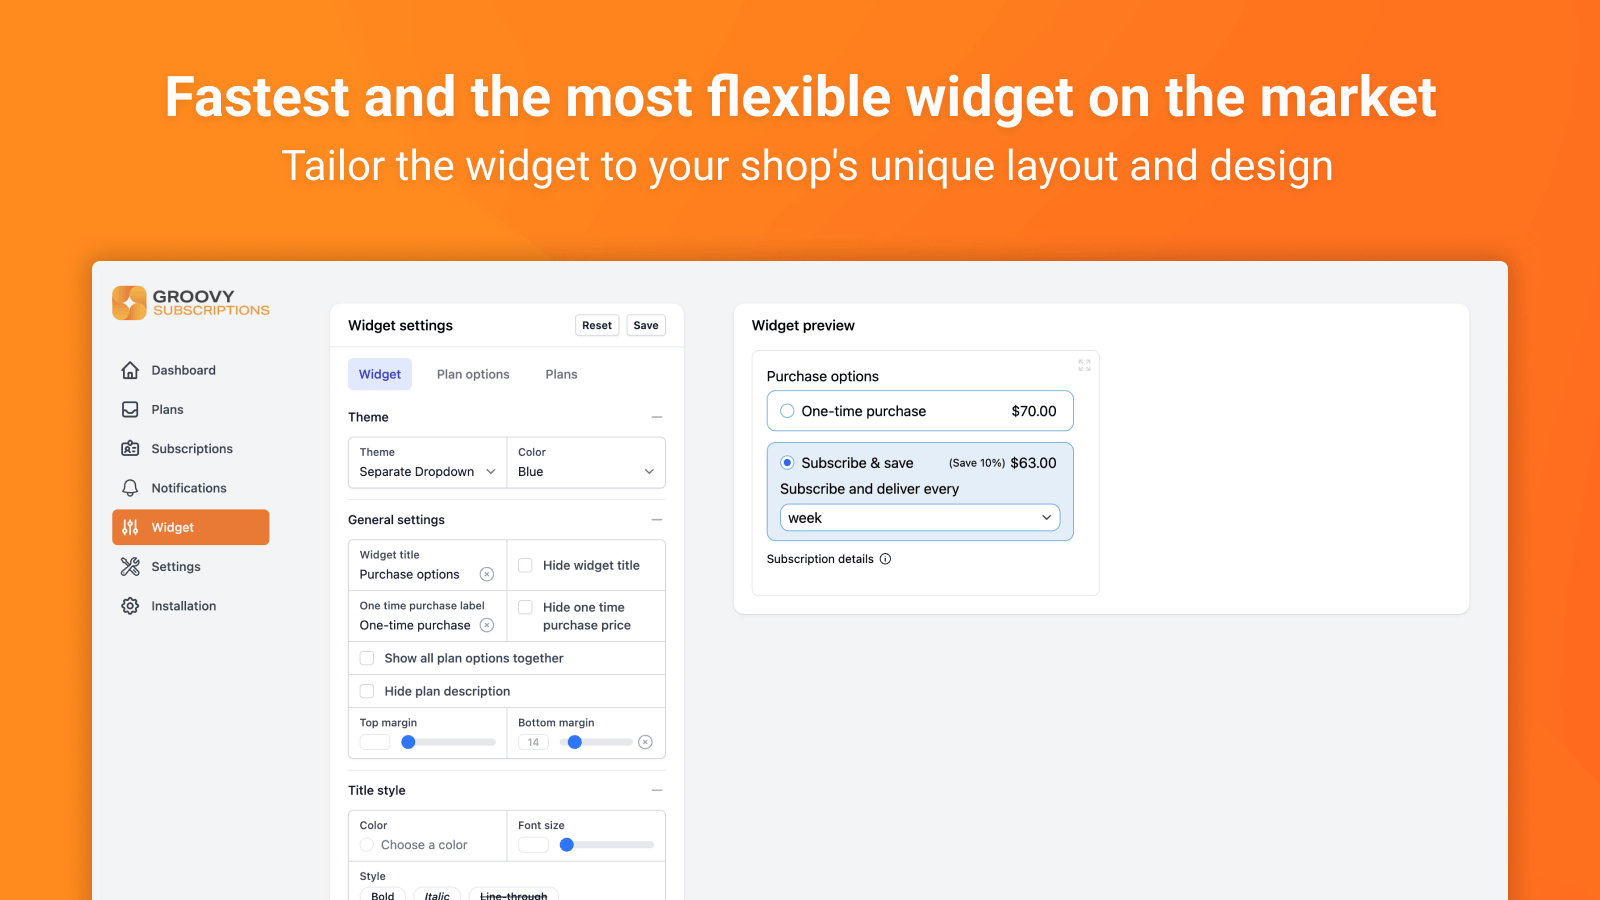 Fastest and the most flexible widget on the market